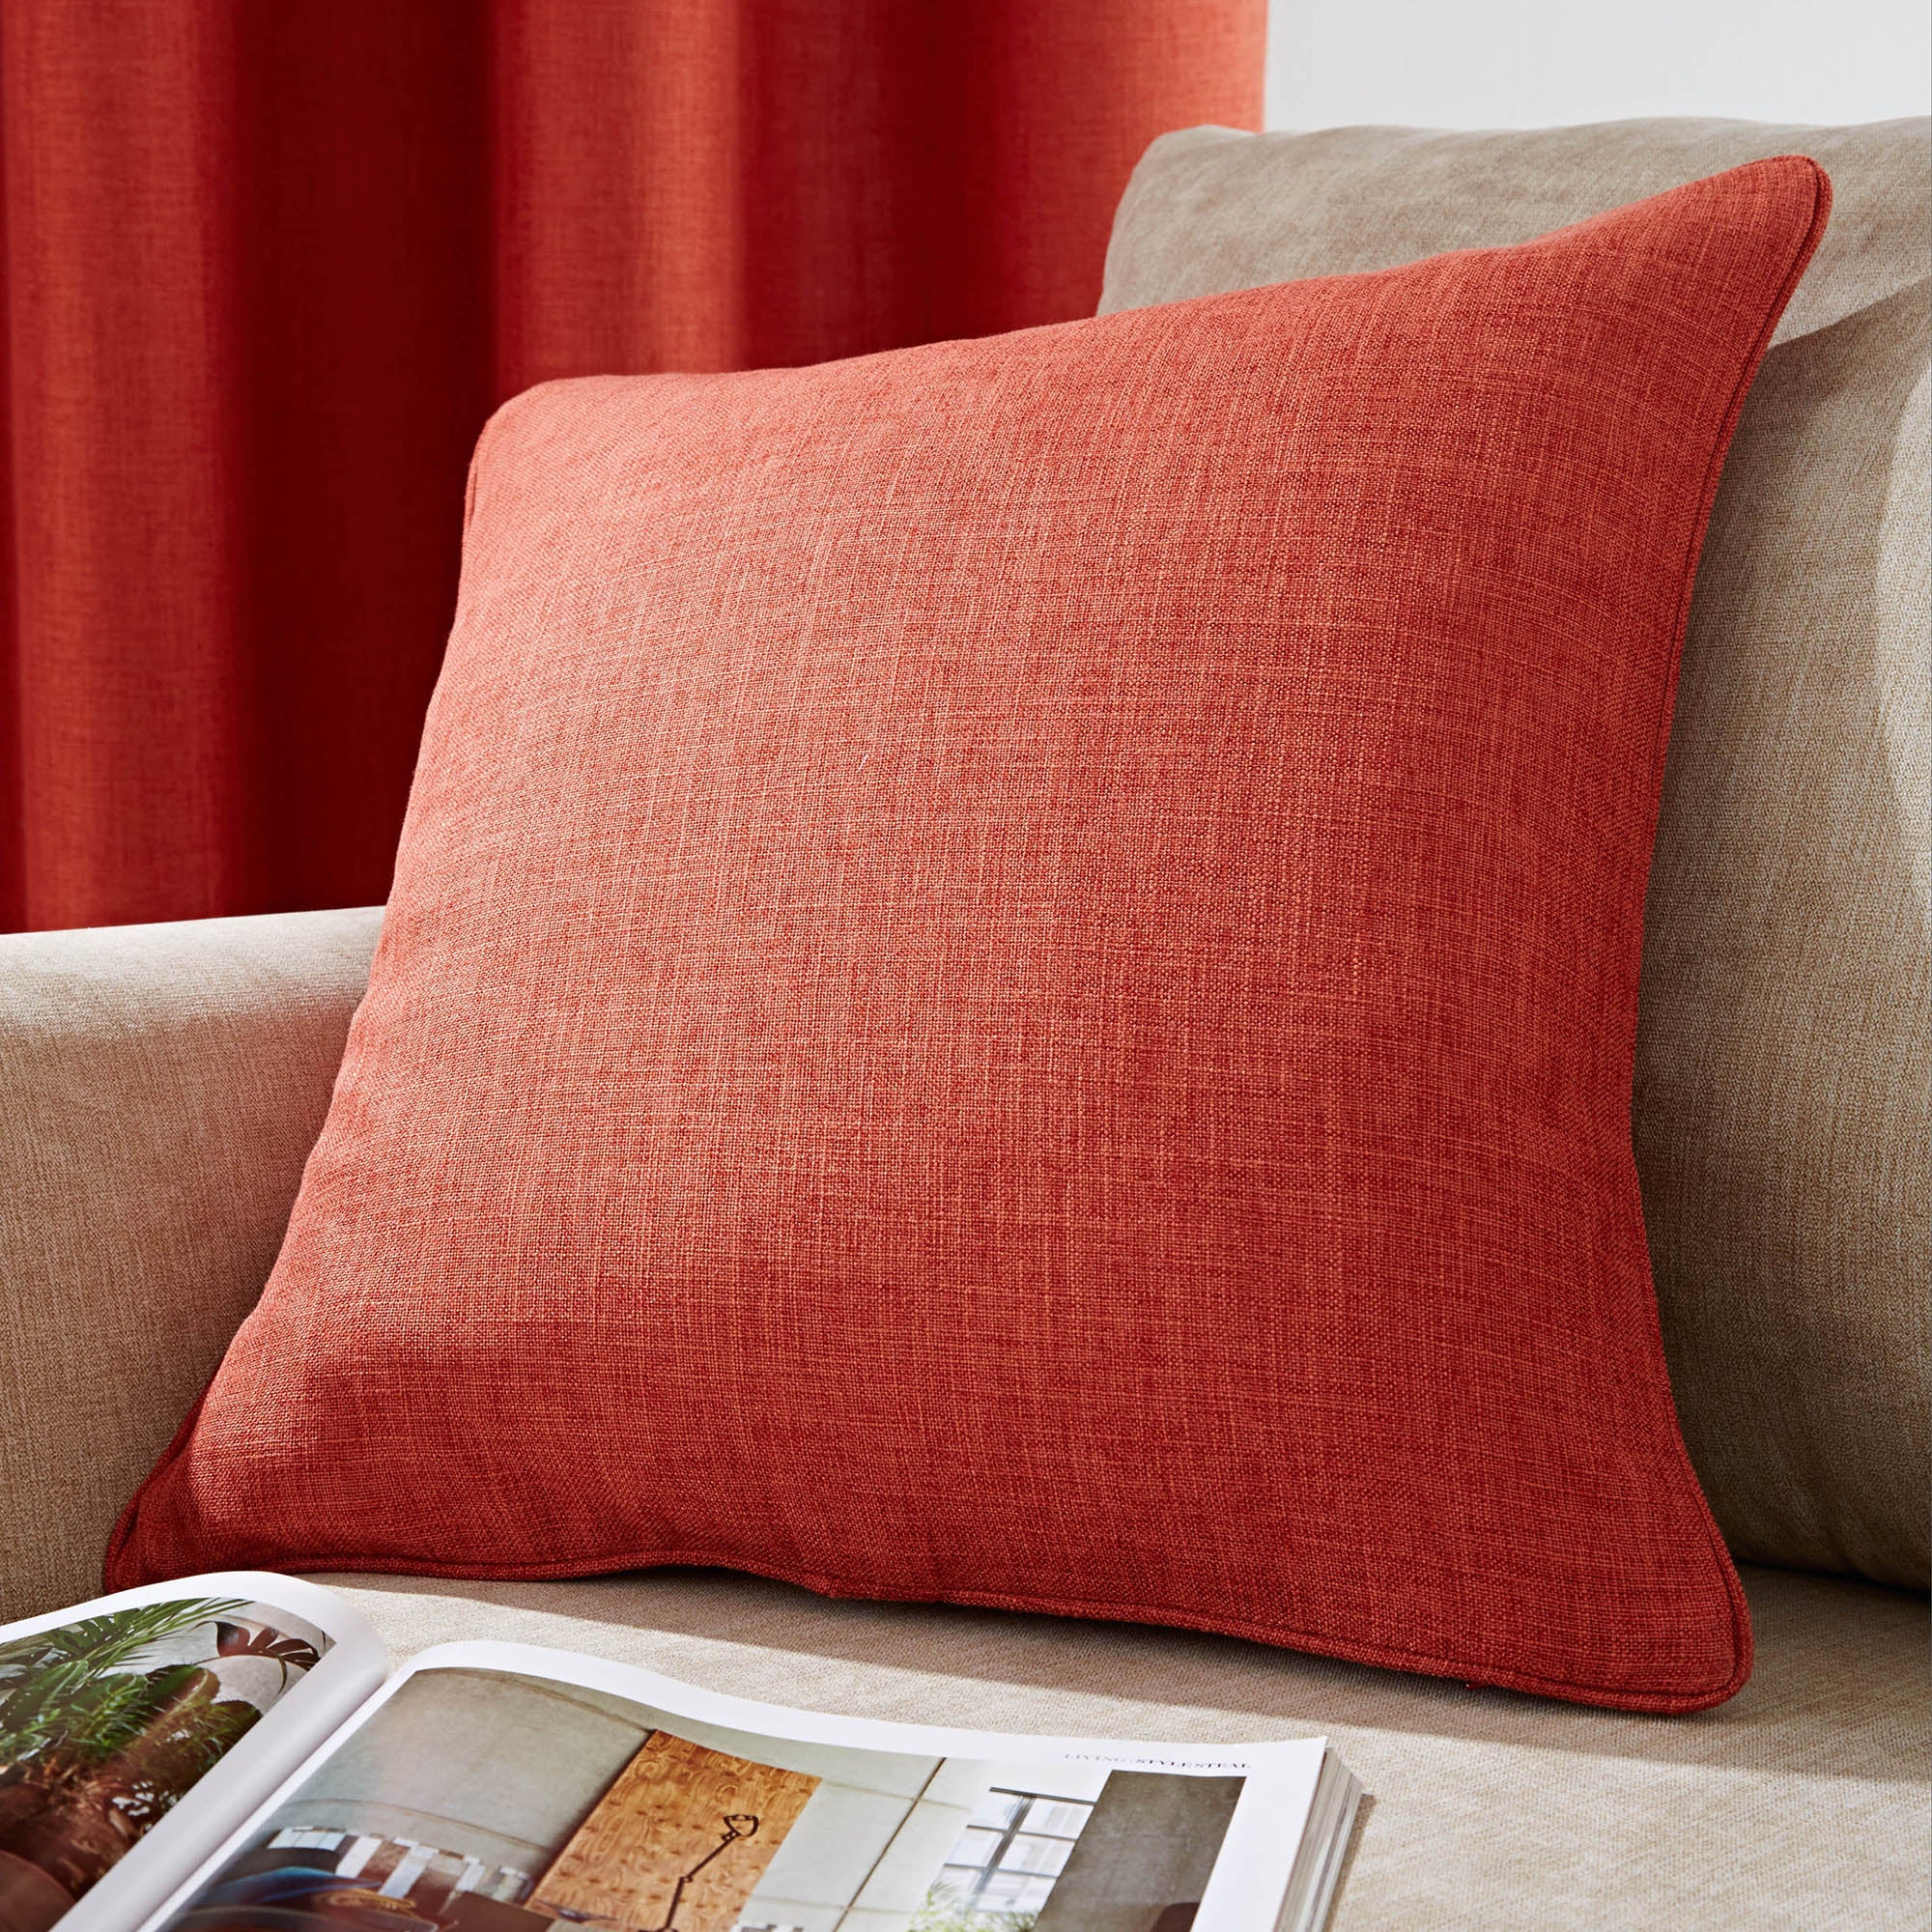 Filled Cushions | Small & Large Filled Cushions | Dunelm - Page 43